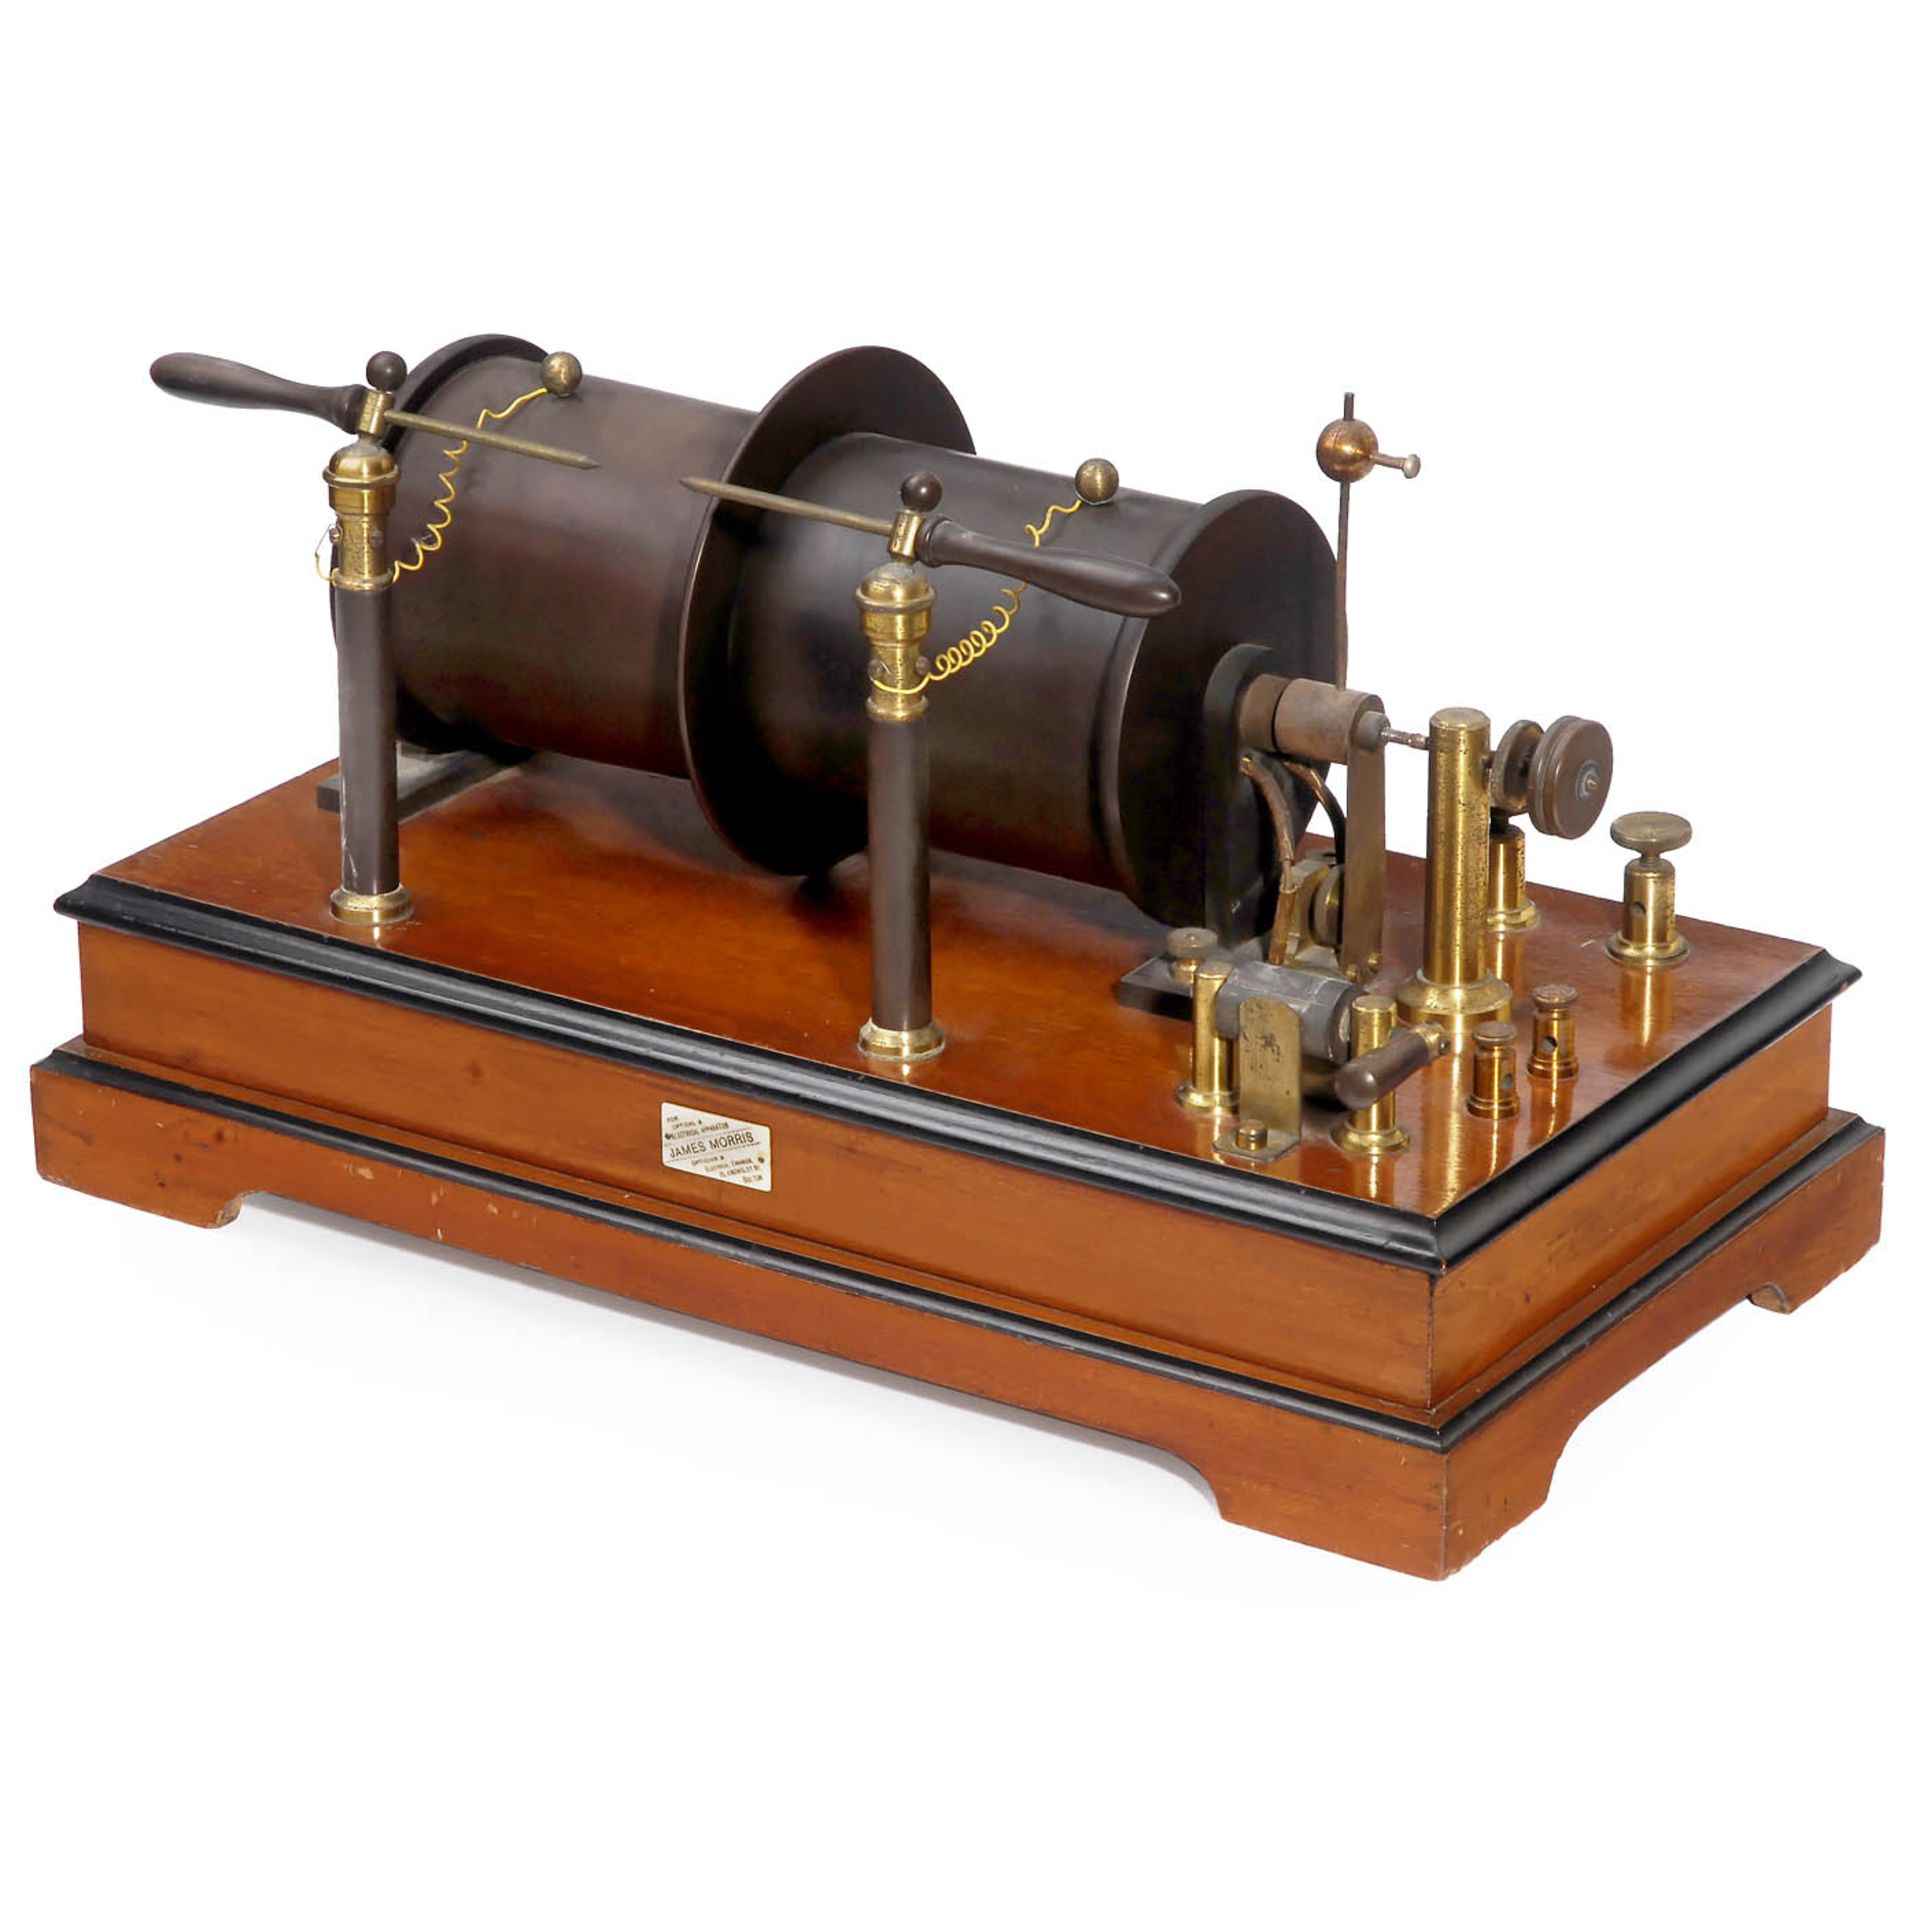 English Laboratory Induction Coil, c. 1900 - Image 2 of 3